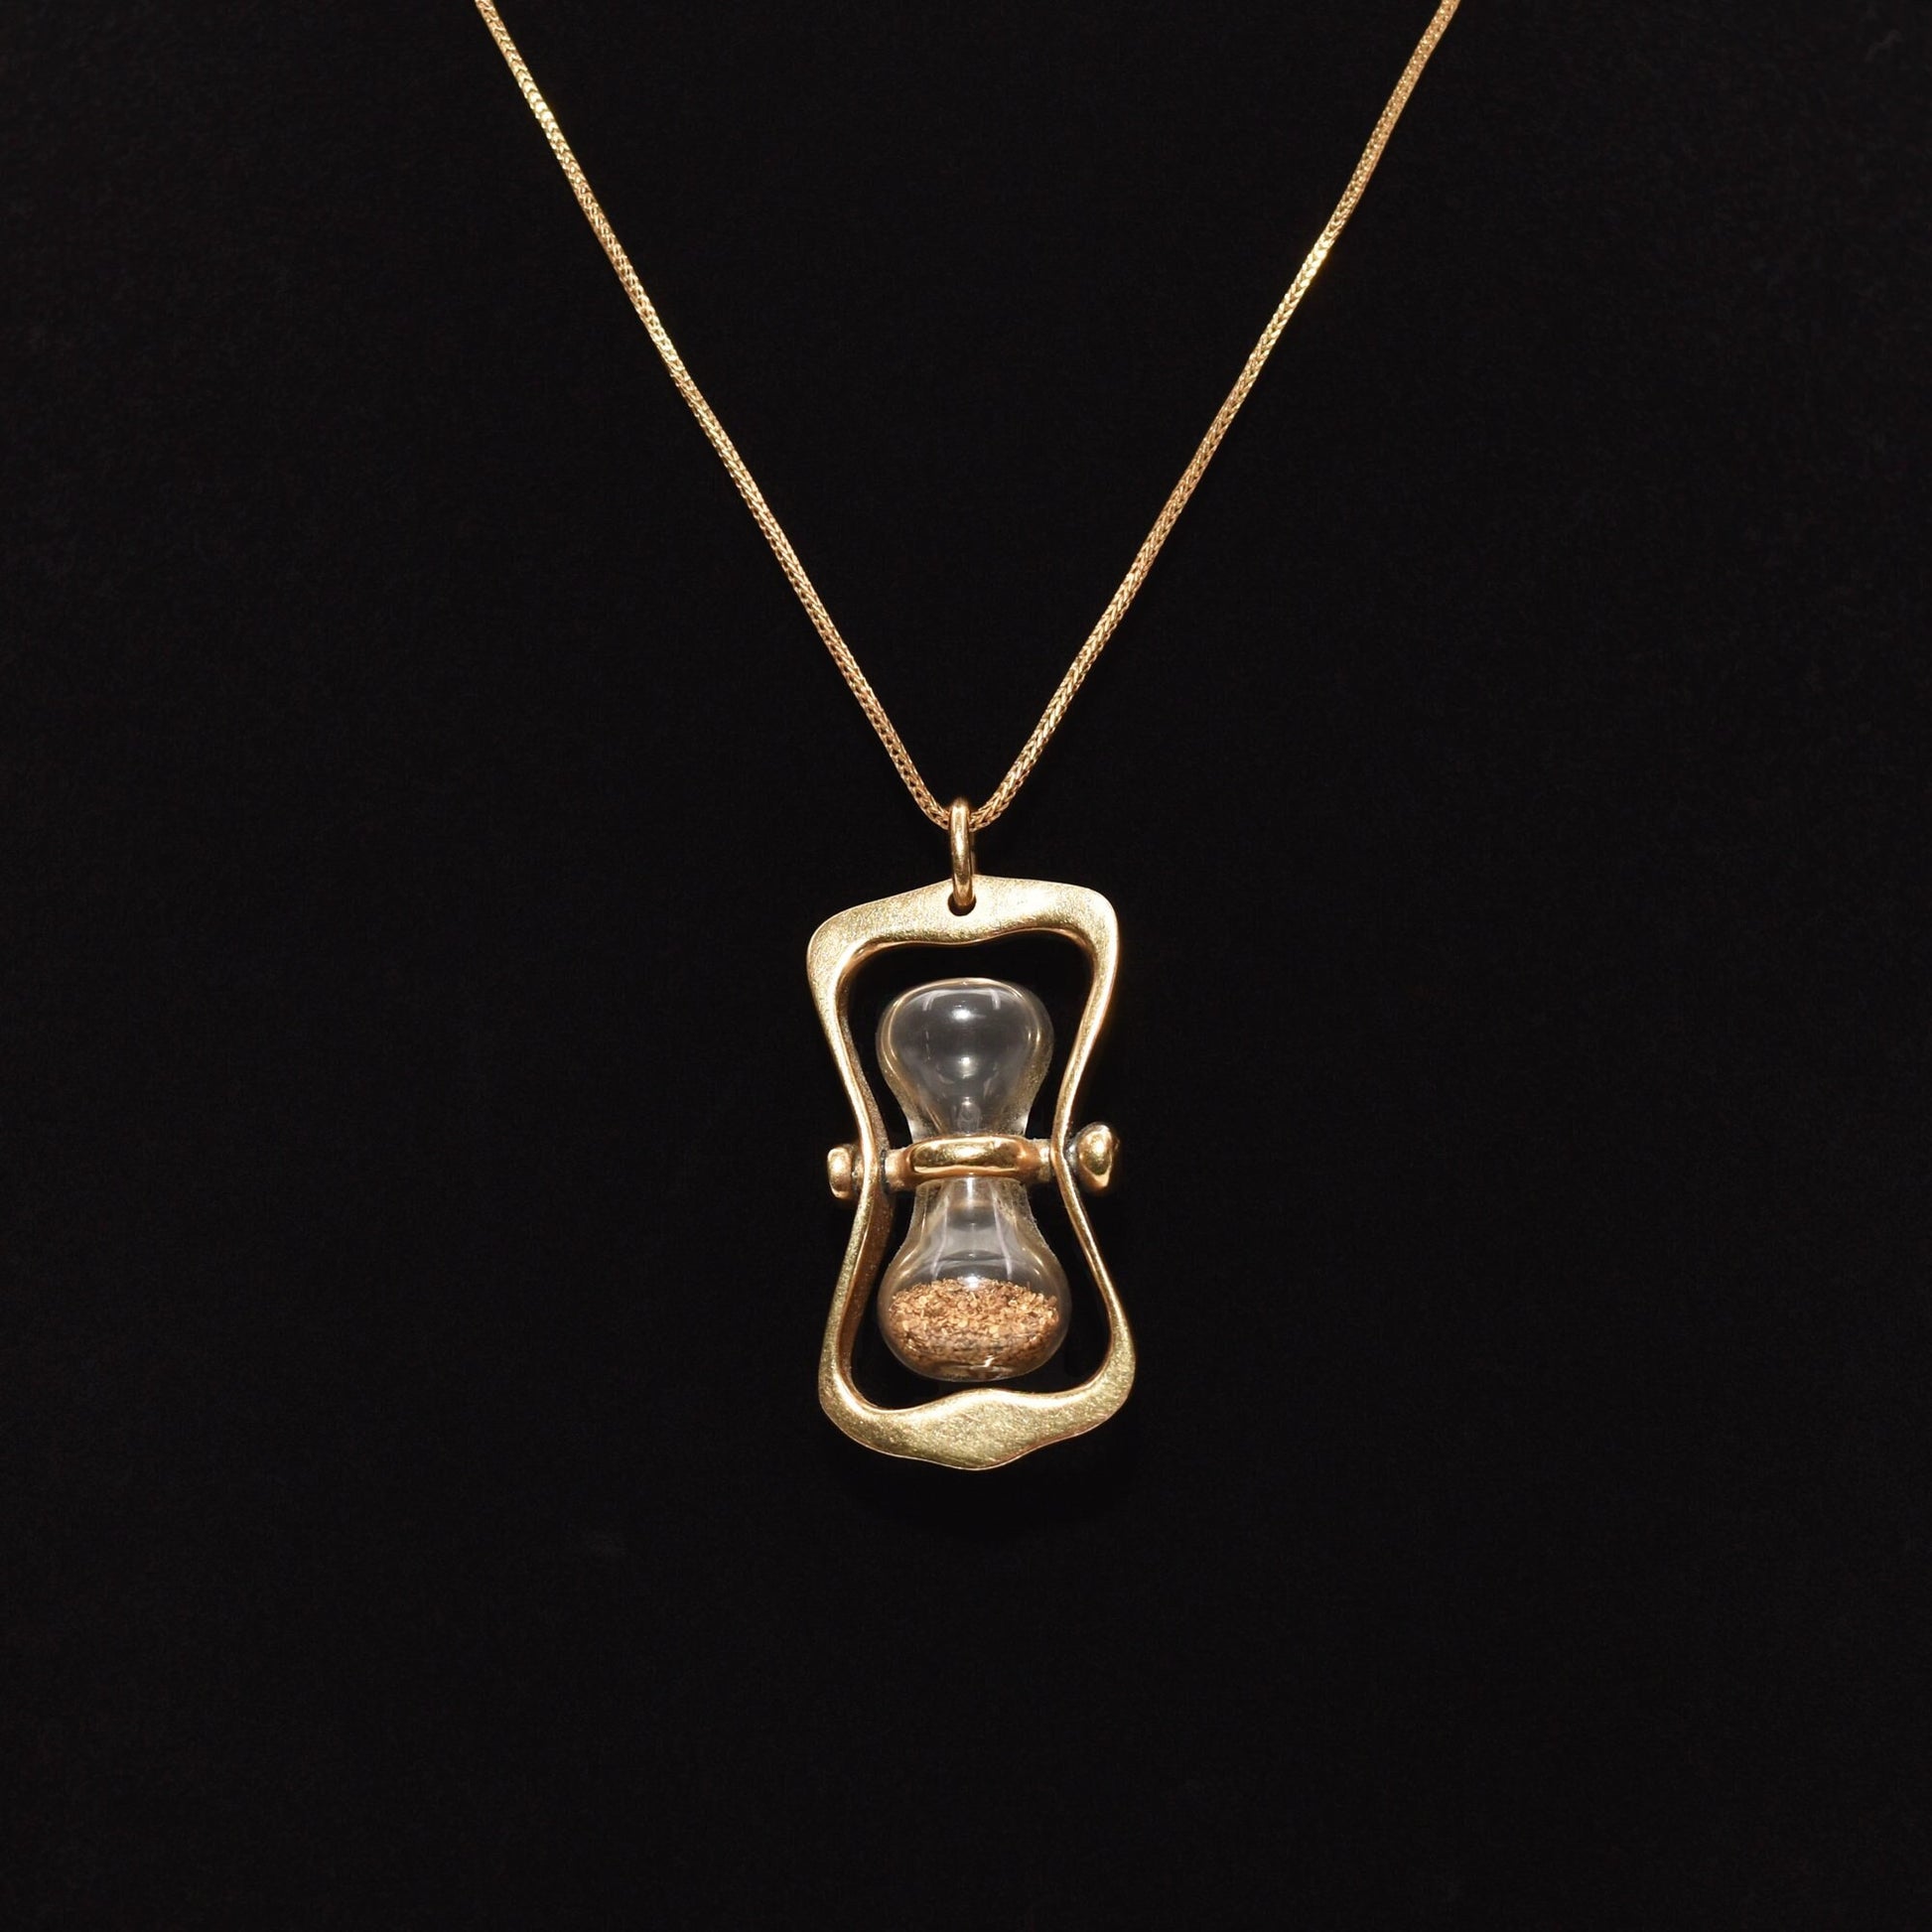 14K gold hourglass pendant with gold dust on a black background, 36mm movable swivel estate jewelry